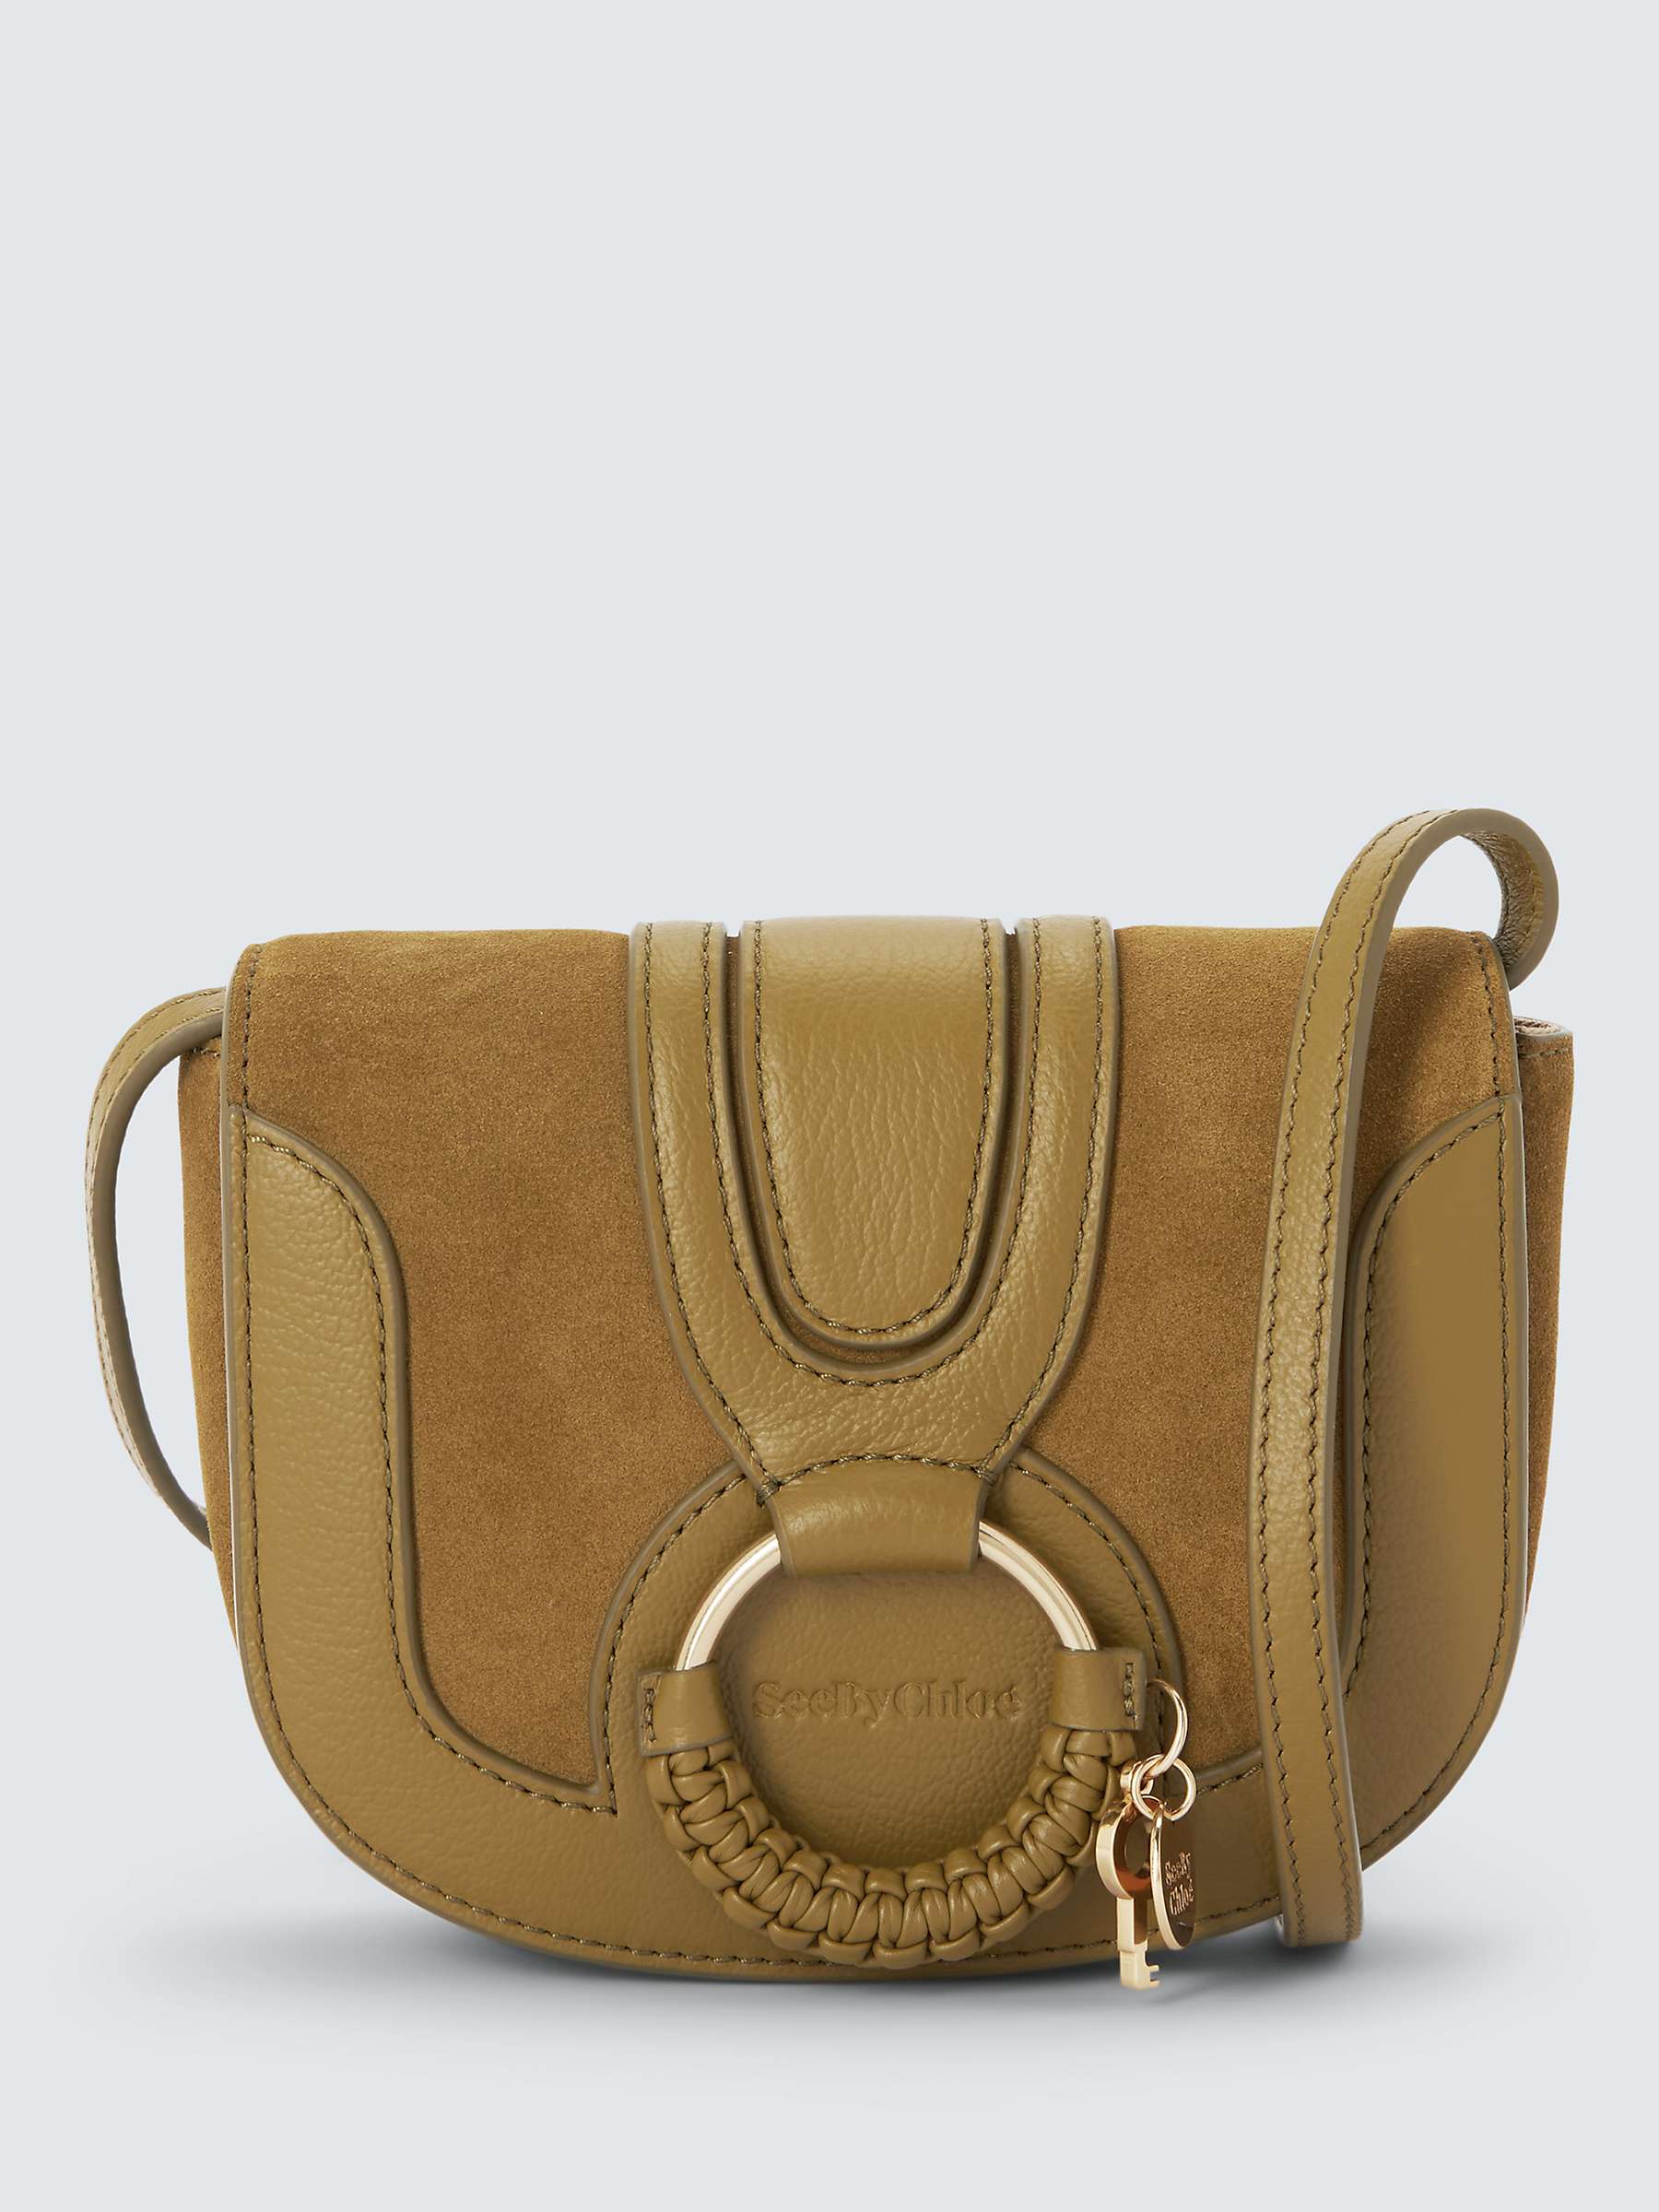 Buy See By Chloé Mini Hana Suede Leather Satchel Bag, Olive Online at johnlewis.com